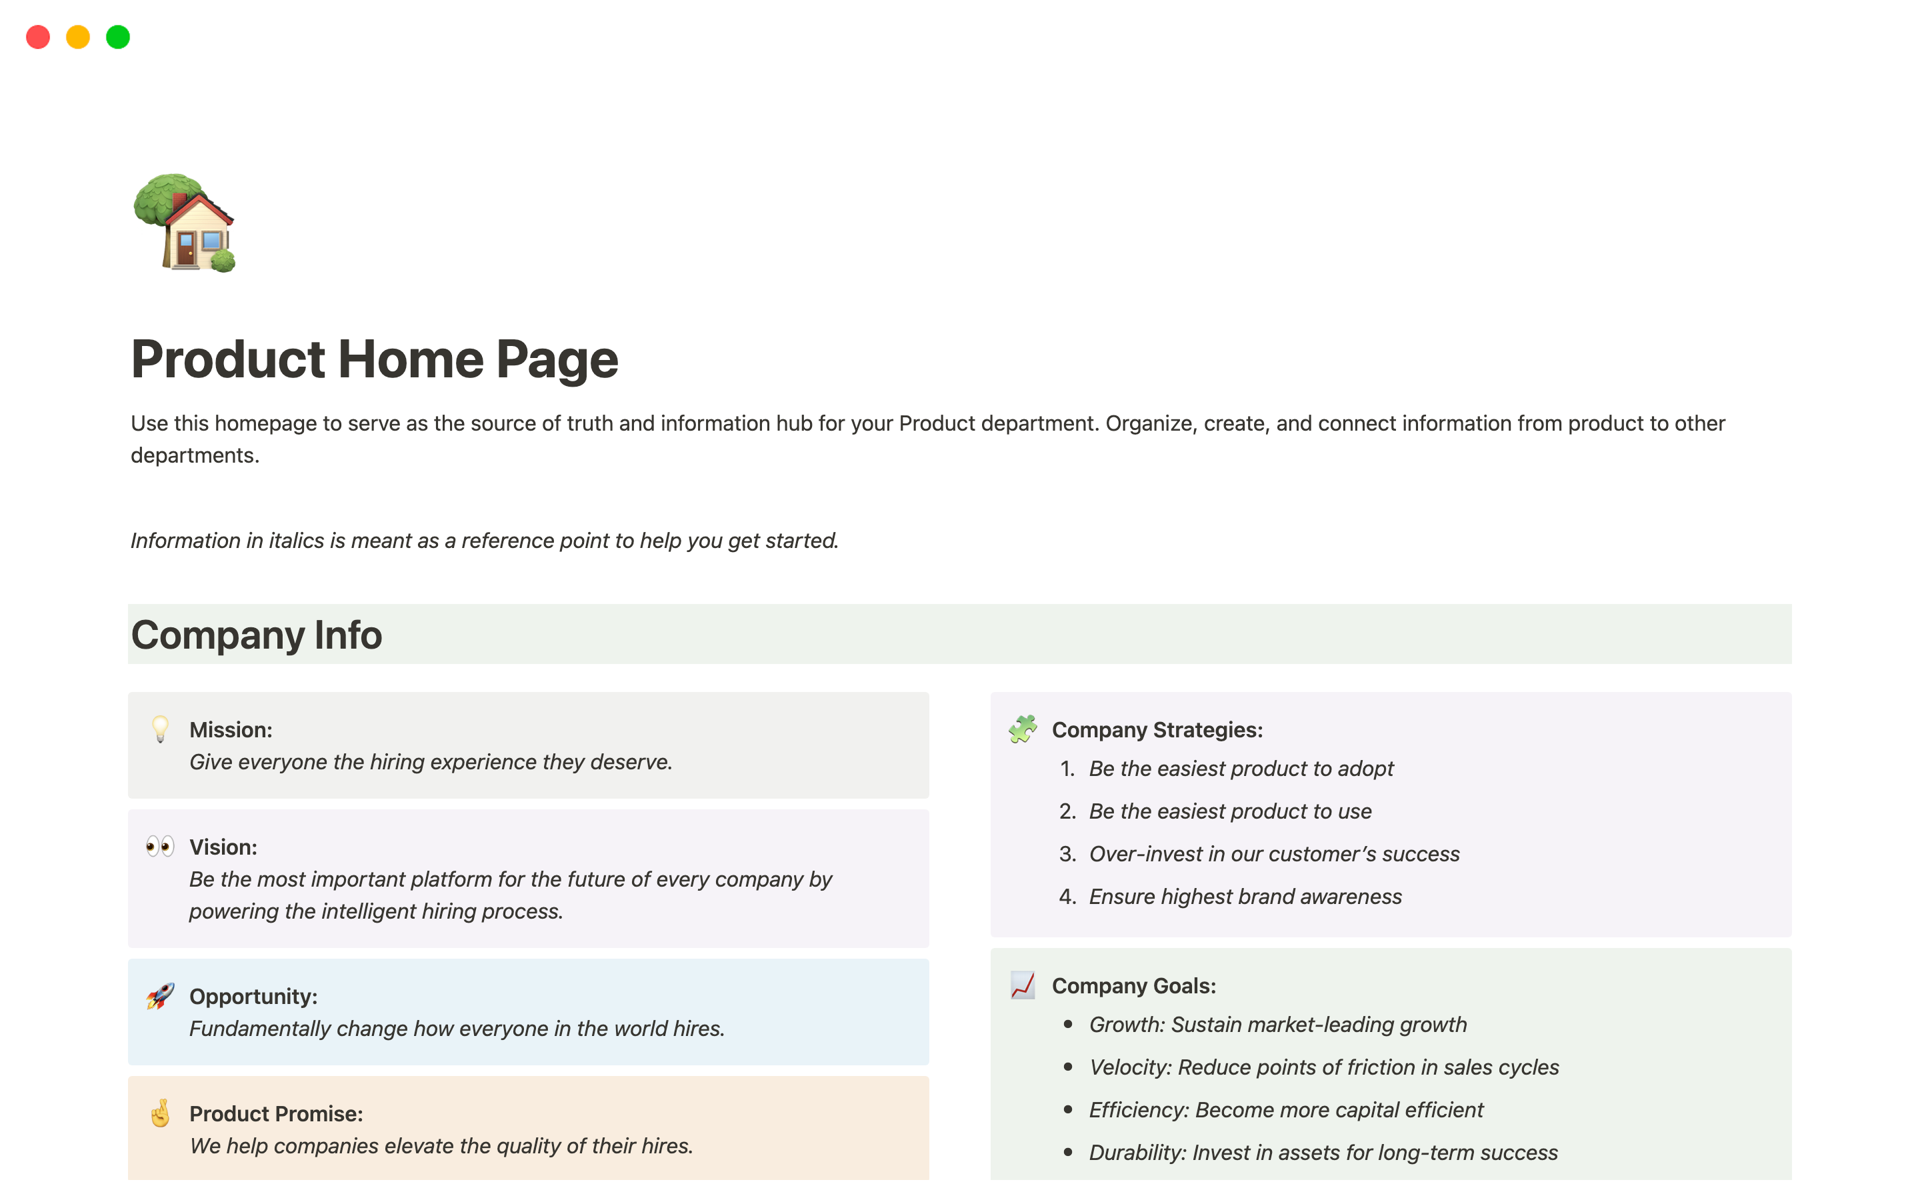 Use this homepage to serve as the source of truth and information hub for your Product team. Organize, create, and connect information from product to other departments